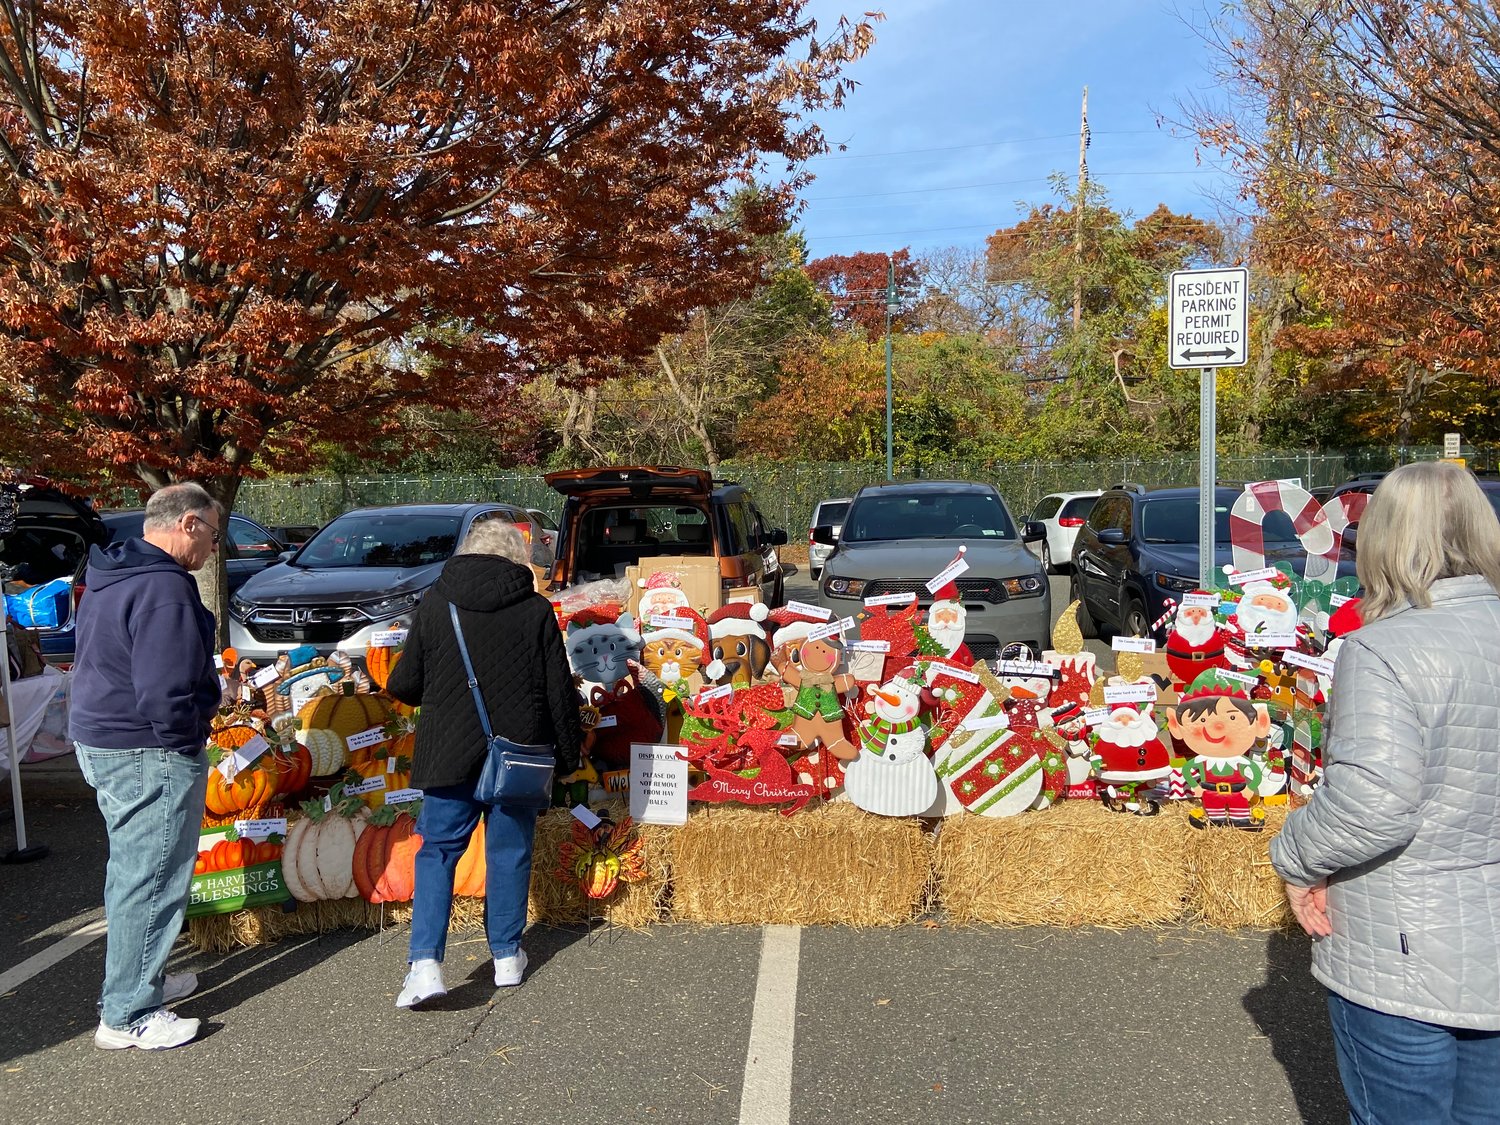 More than 50 vendors sold their goods at the 
inaugural Seaford Holiday Market on Nov. 20. Christmas
decor was for sale.